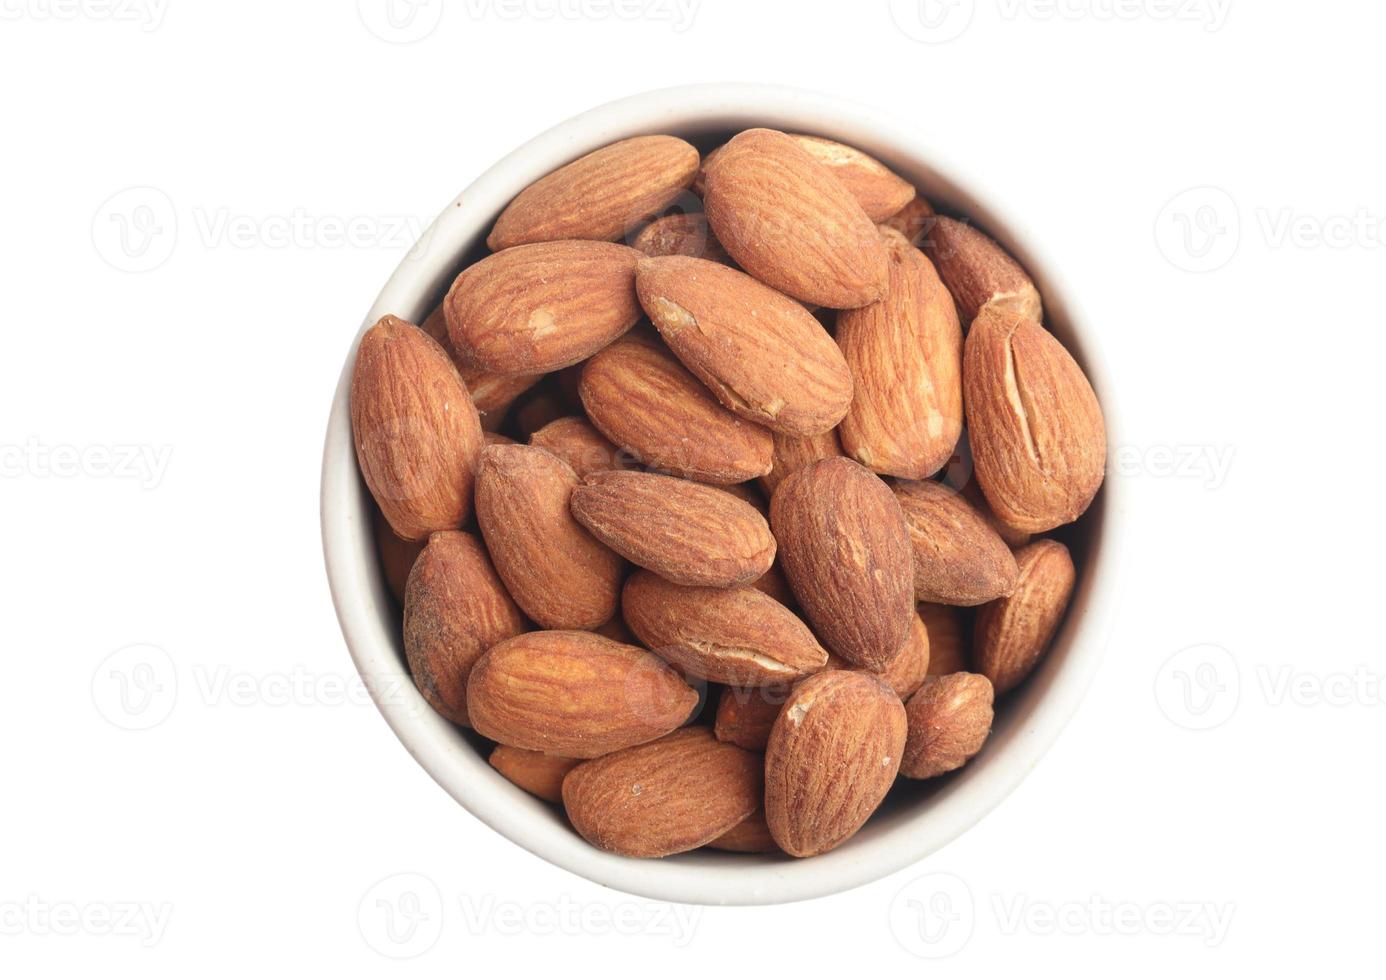 Almonds in a cup on a white background photo